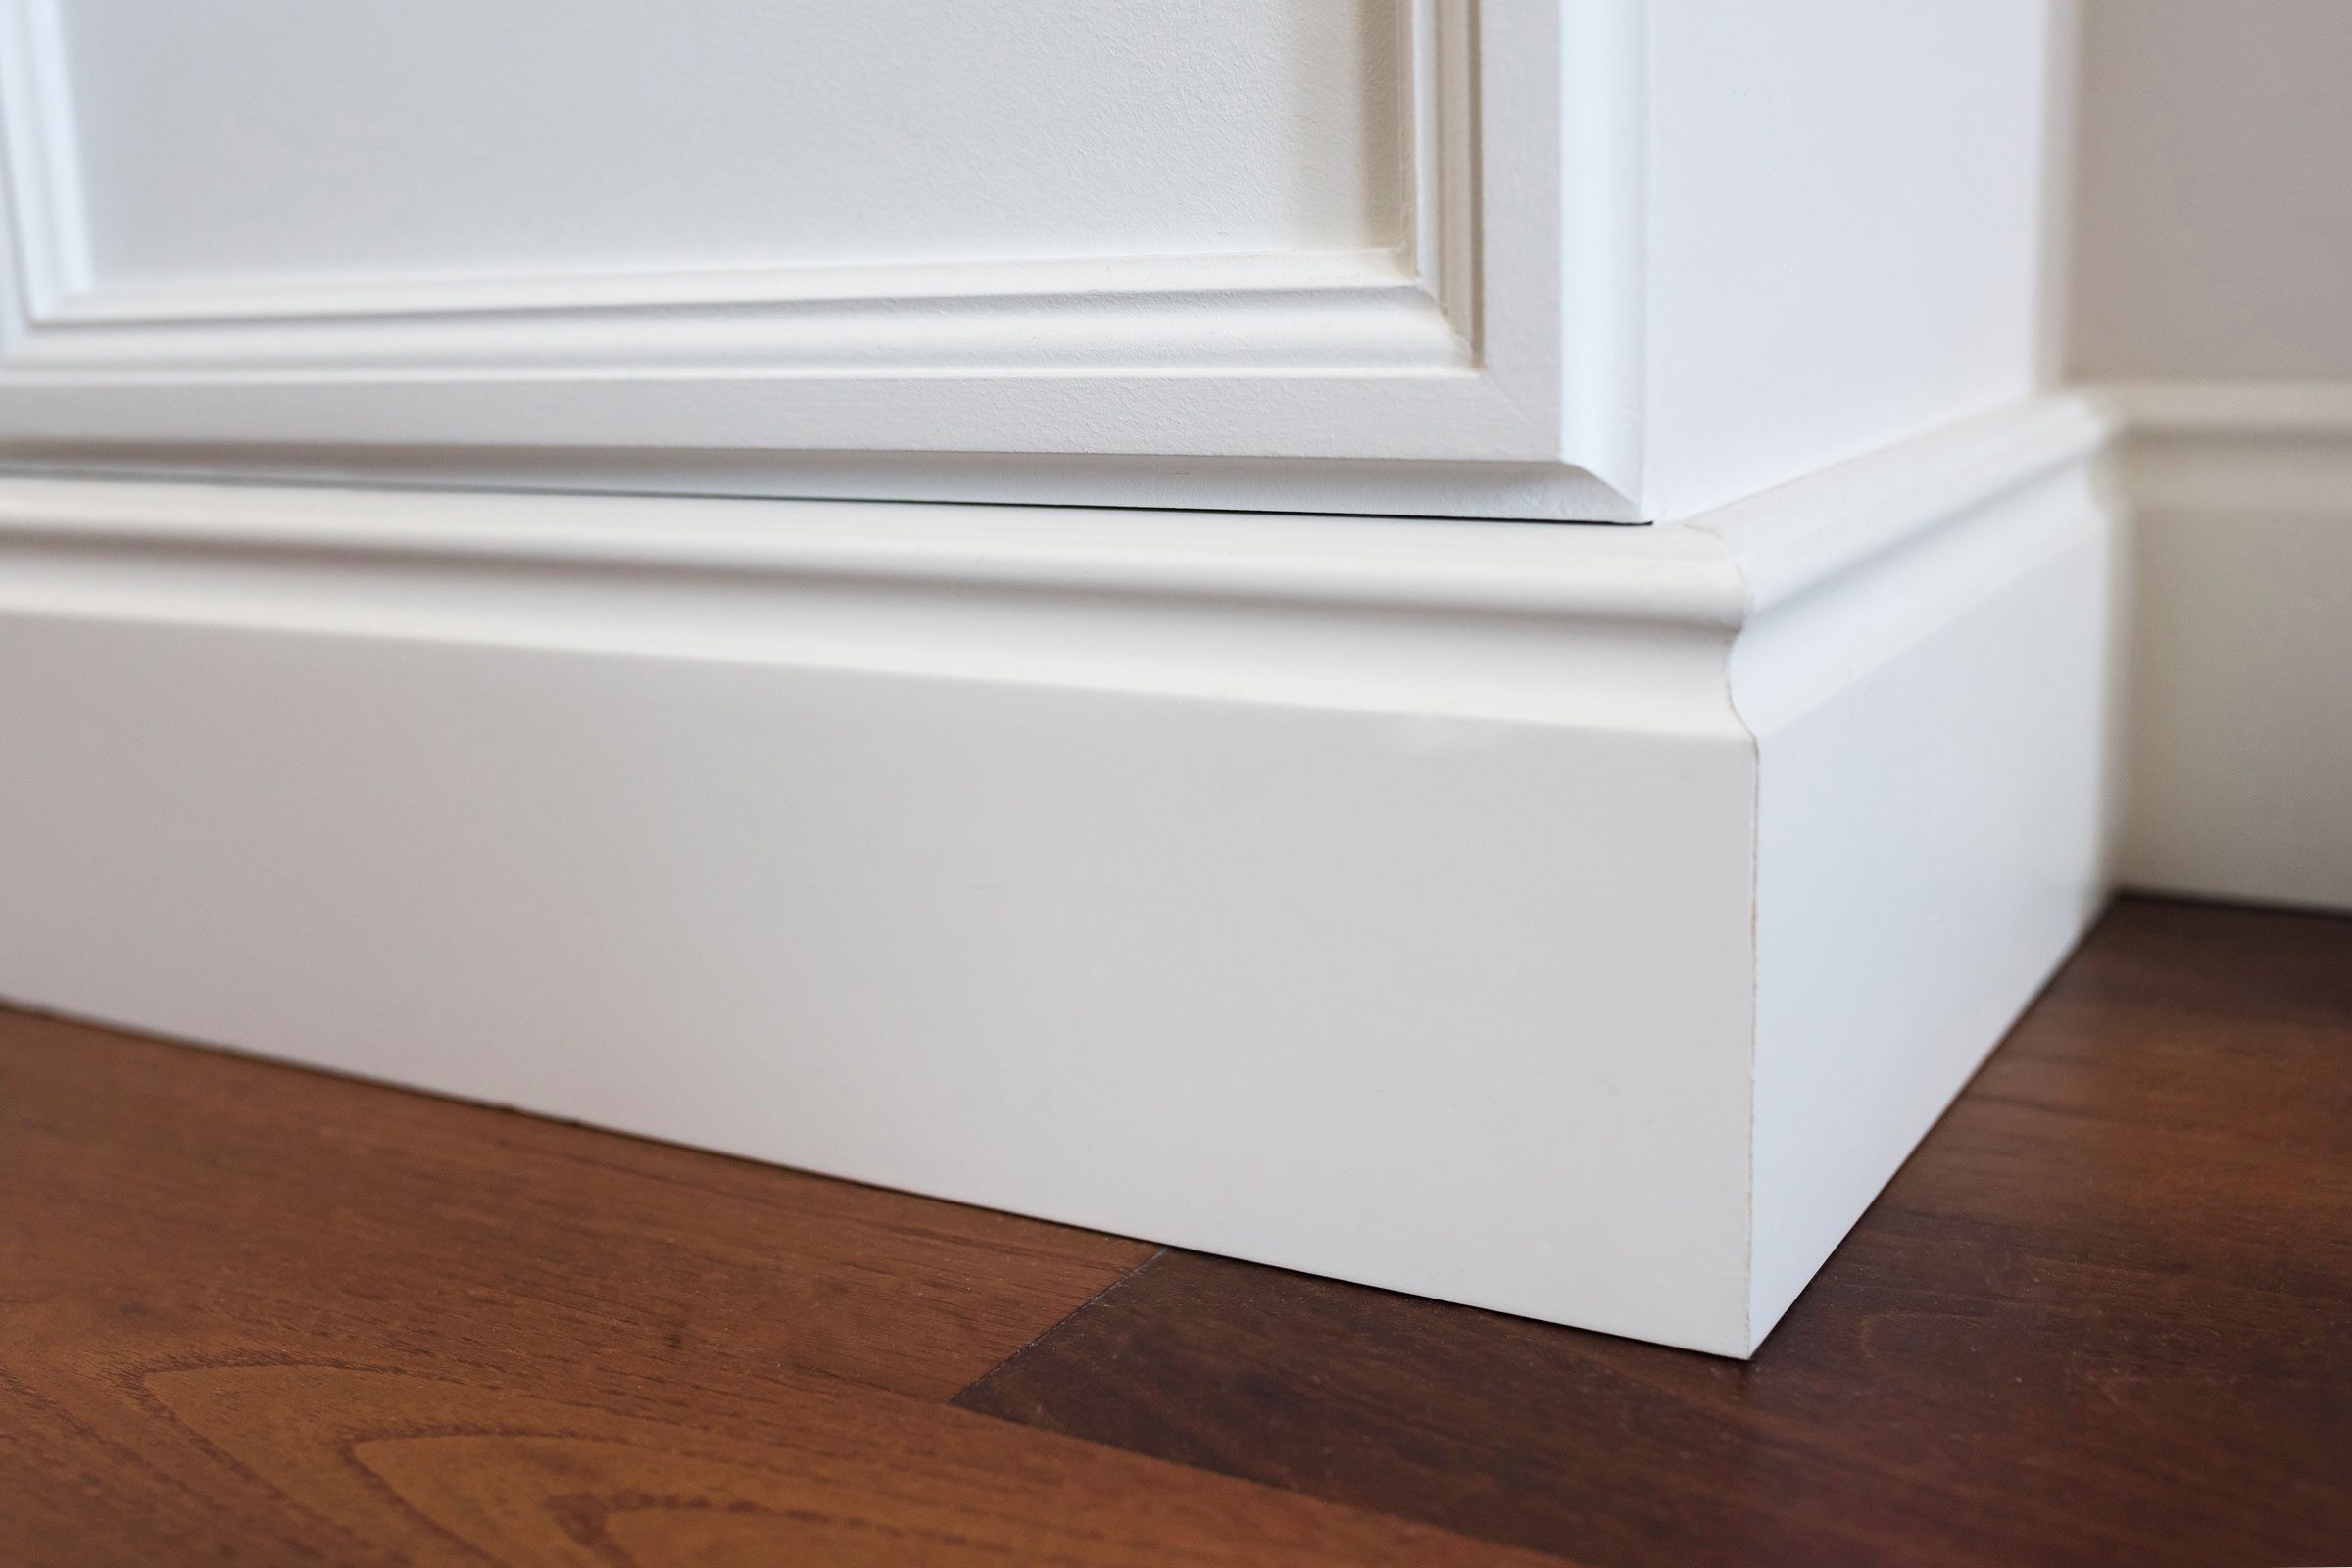 https://www.rd.com/wp-content/uploads/2022/03/how-to-clean-baseboards-GettyImages-1190699955-MLedit.jpg